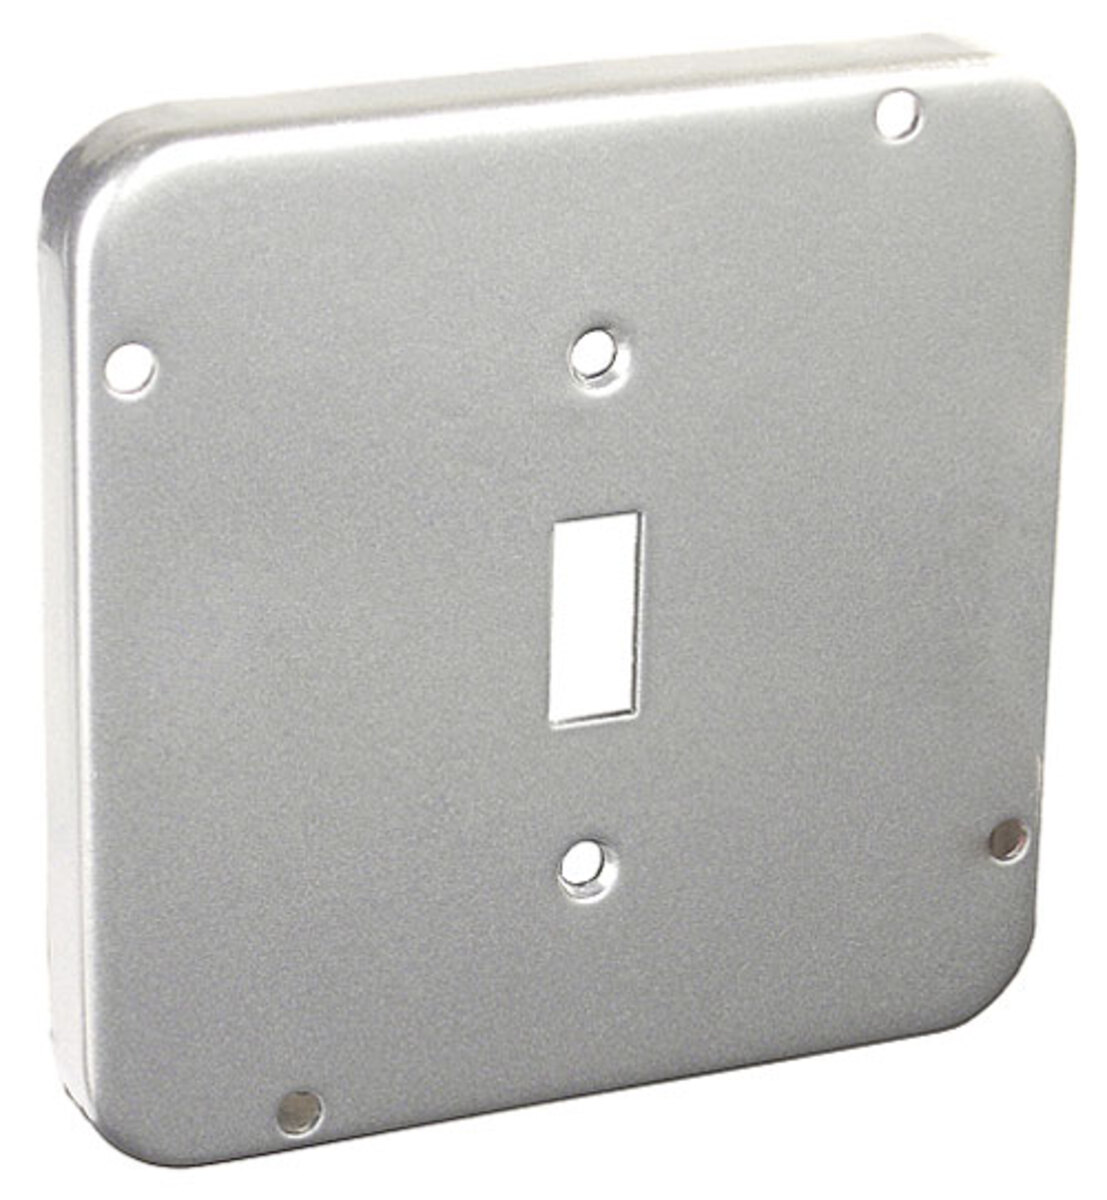 4-11/16" Square Industrial Surface Cover, 1/2" Raised - Toggle